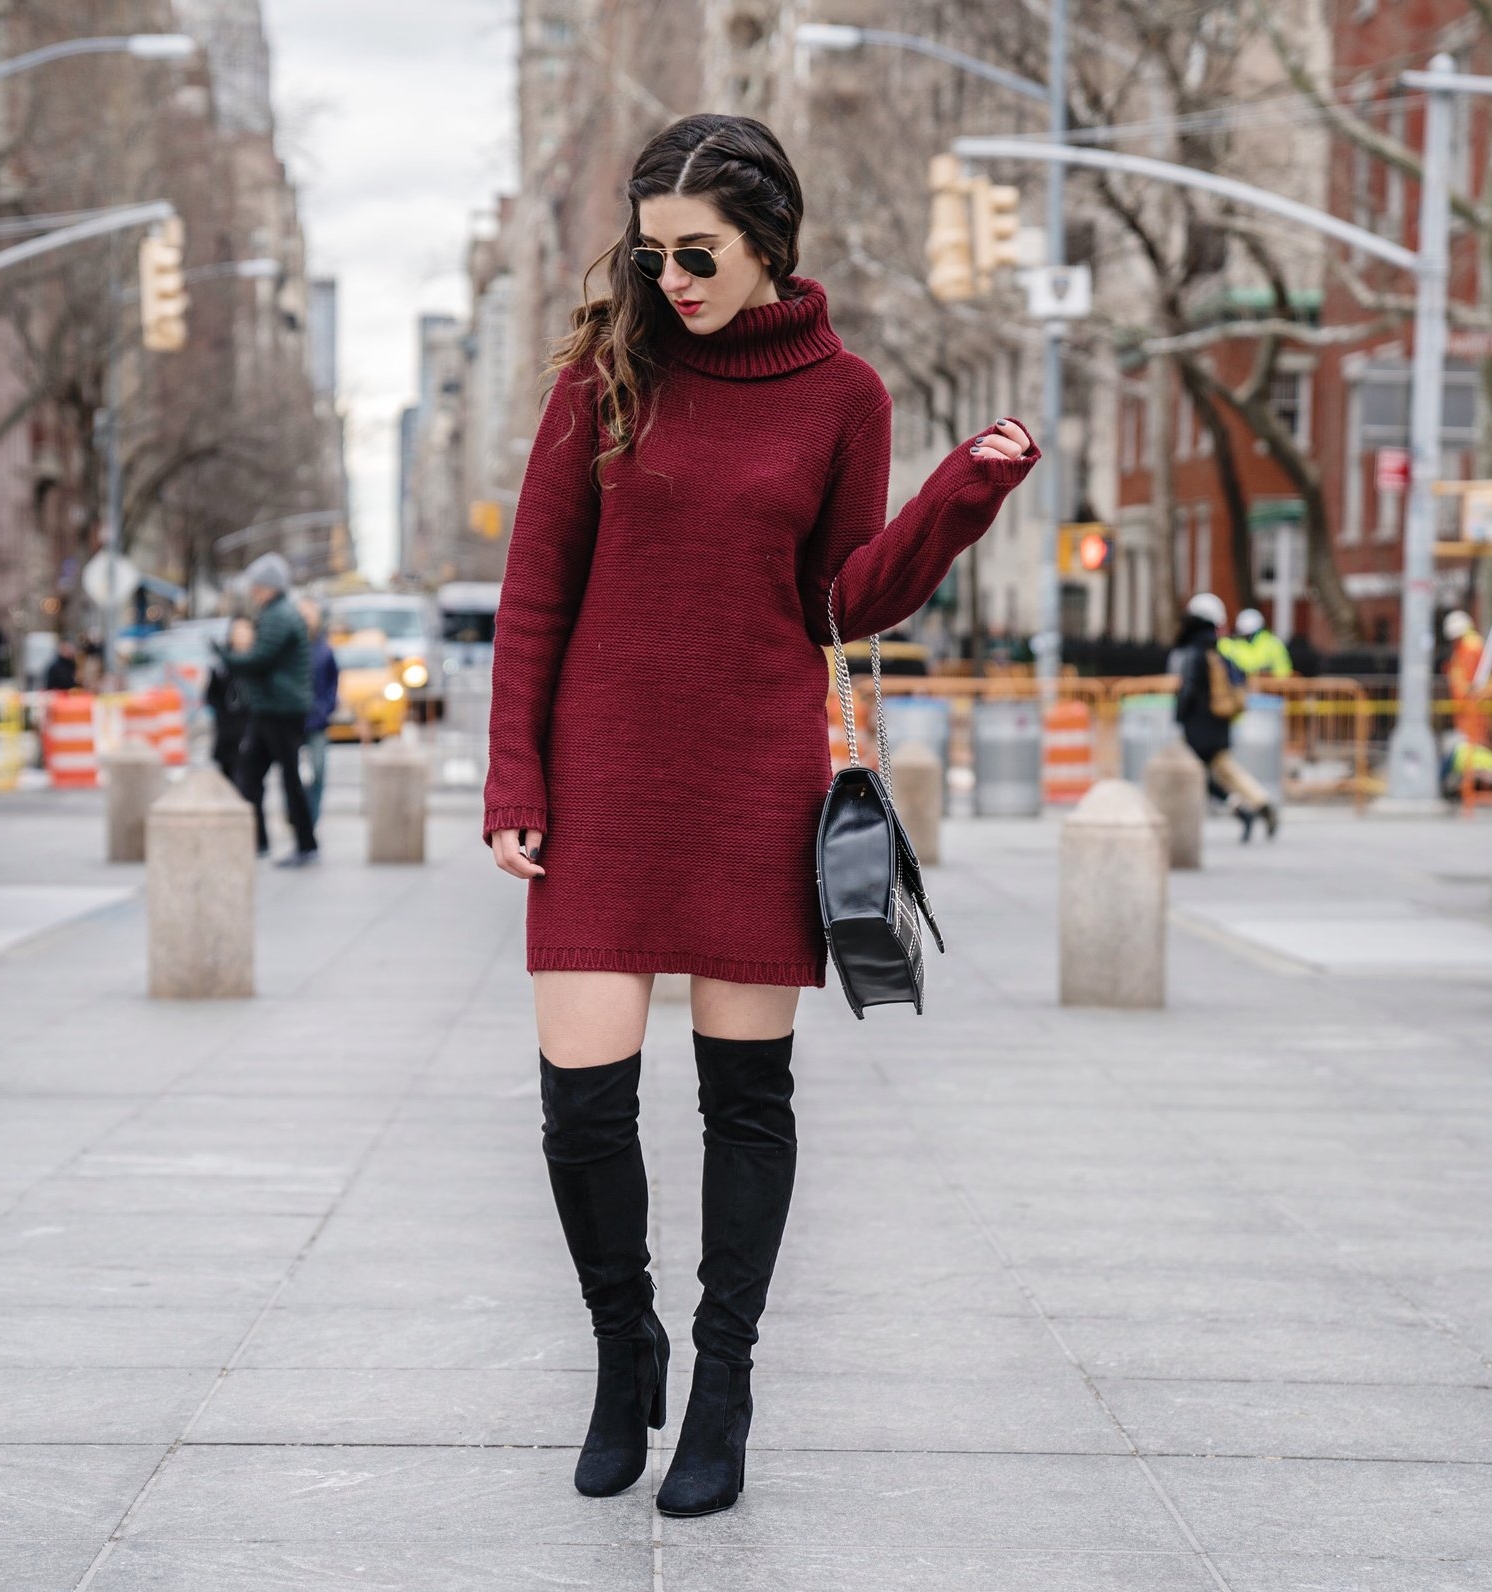 Maroon Sweater Dress OTK Boots My Biggest Blogging Mistake Esther Santer Fashion Blog NYC Street Style Blogger Outfit OOTD Trendy Red Girl Women Sunglasses RayBan Aviators Wearing Shopping Zara Casual Inspo Photoshoot New York City Bag Grid Purse Hair.JPG